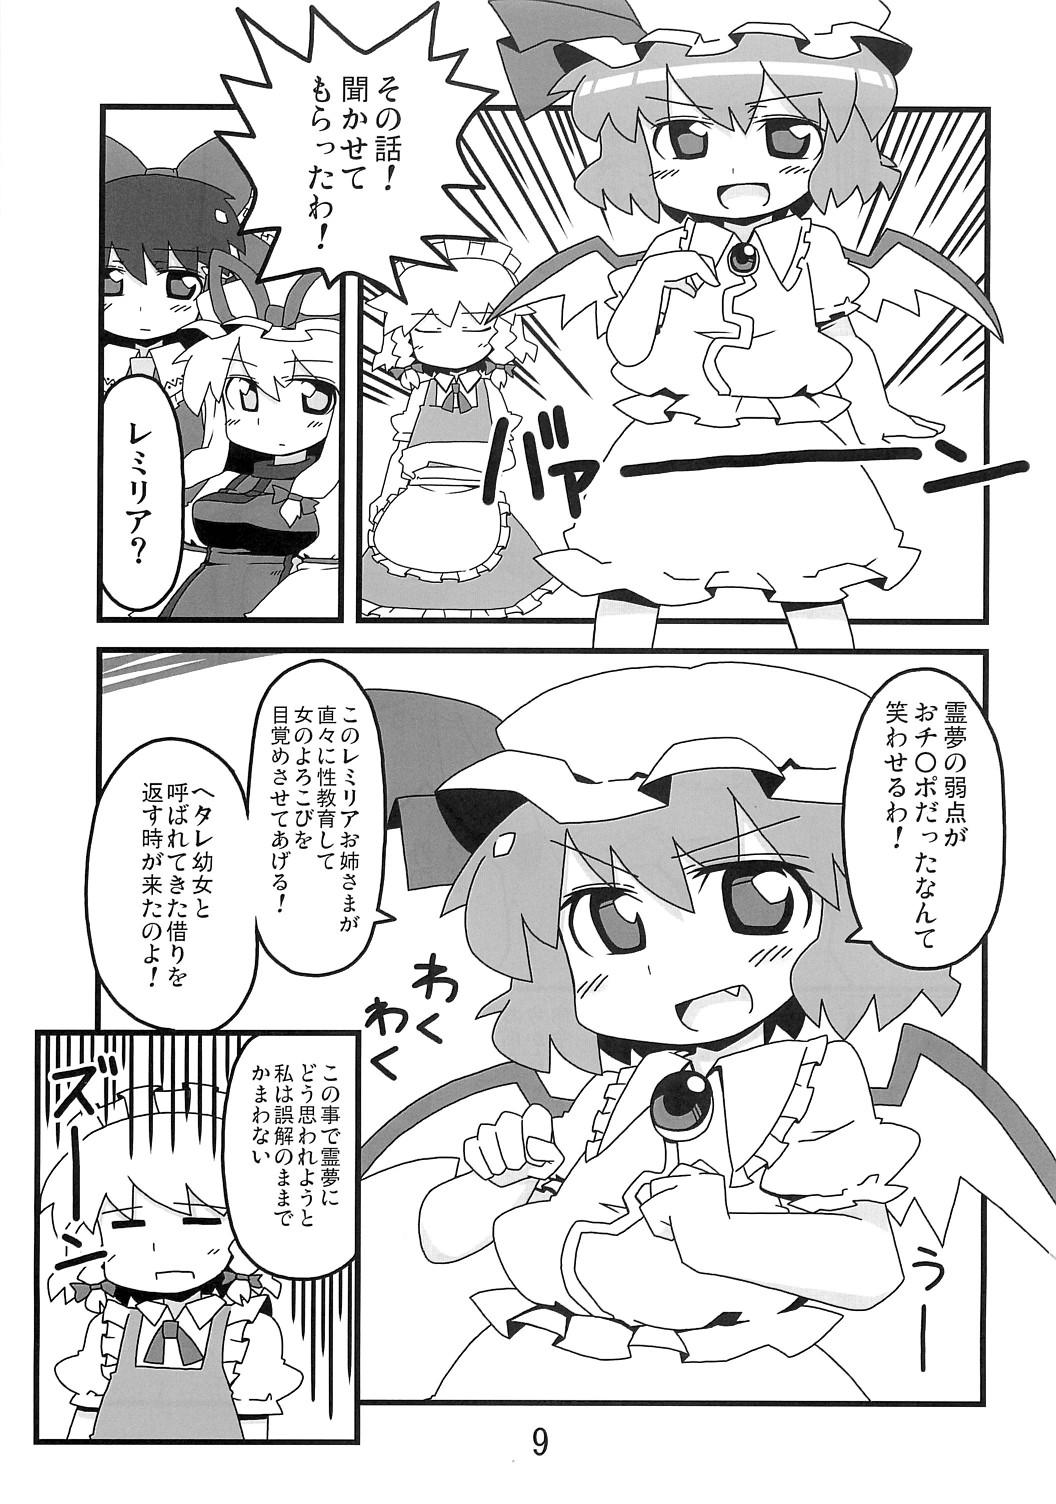 Teenager 東方豊年祭 - Touhou project Tamil - Page 8